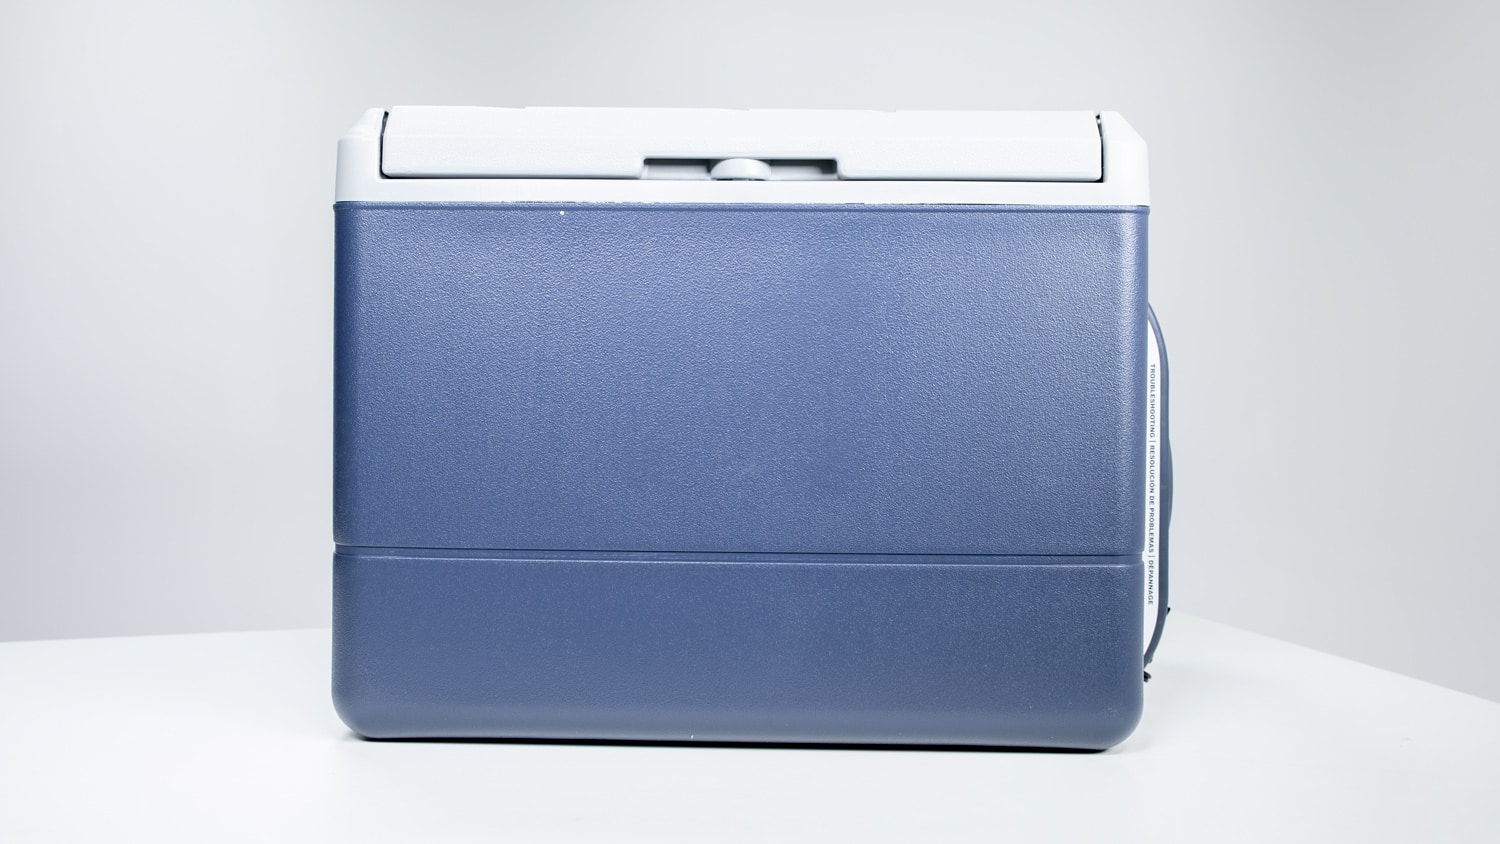 Product shot of the Coleman Powerchill, a high-capacity 12V cooler